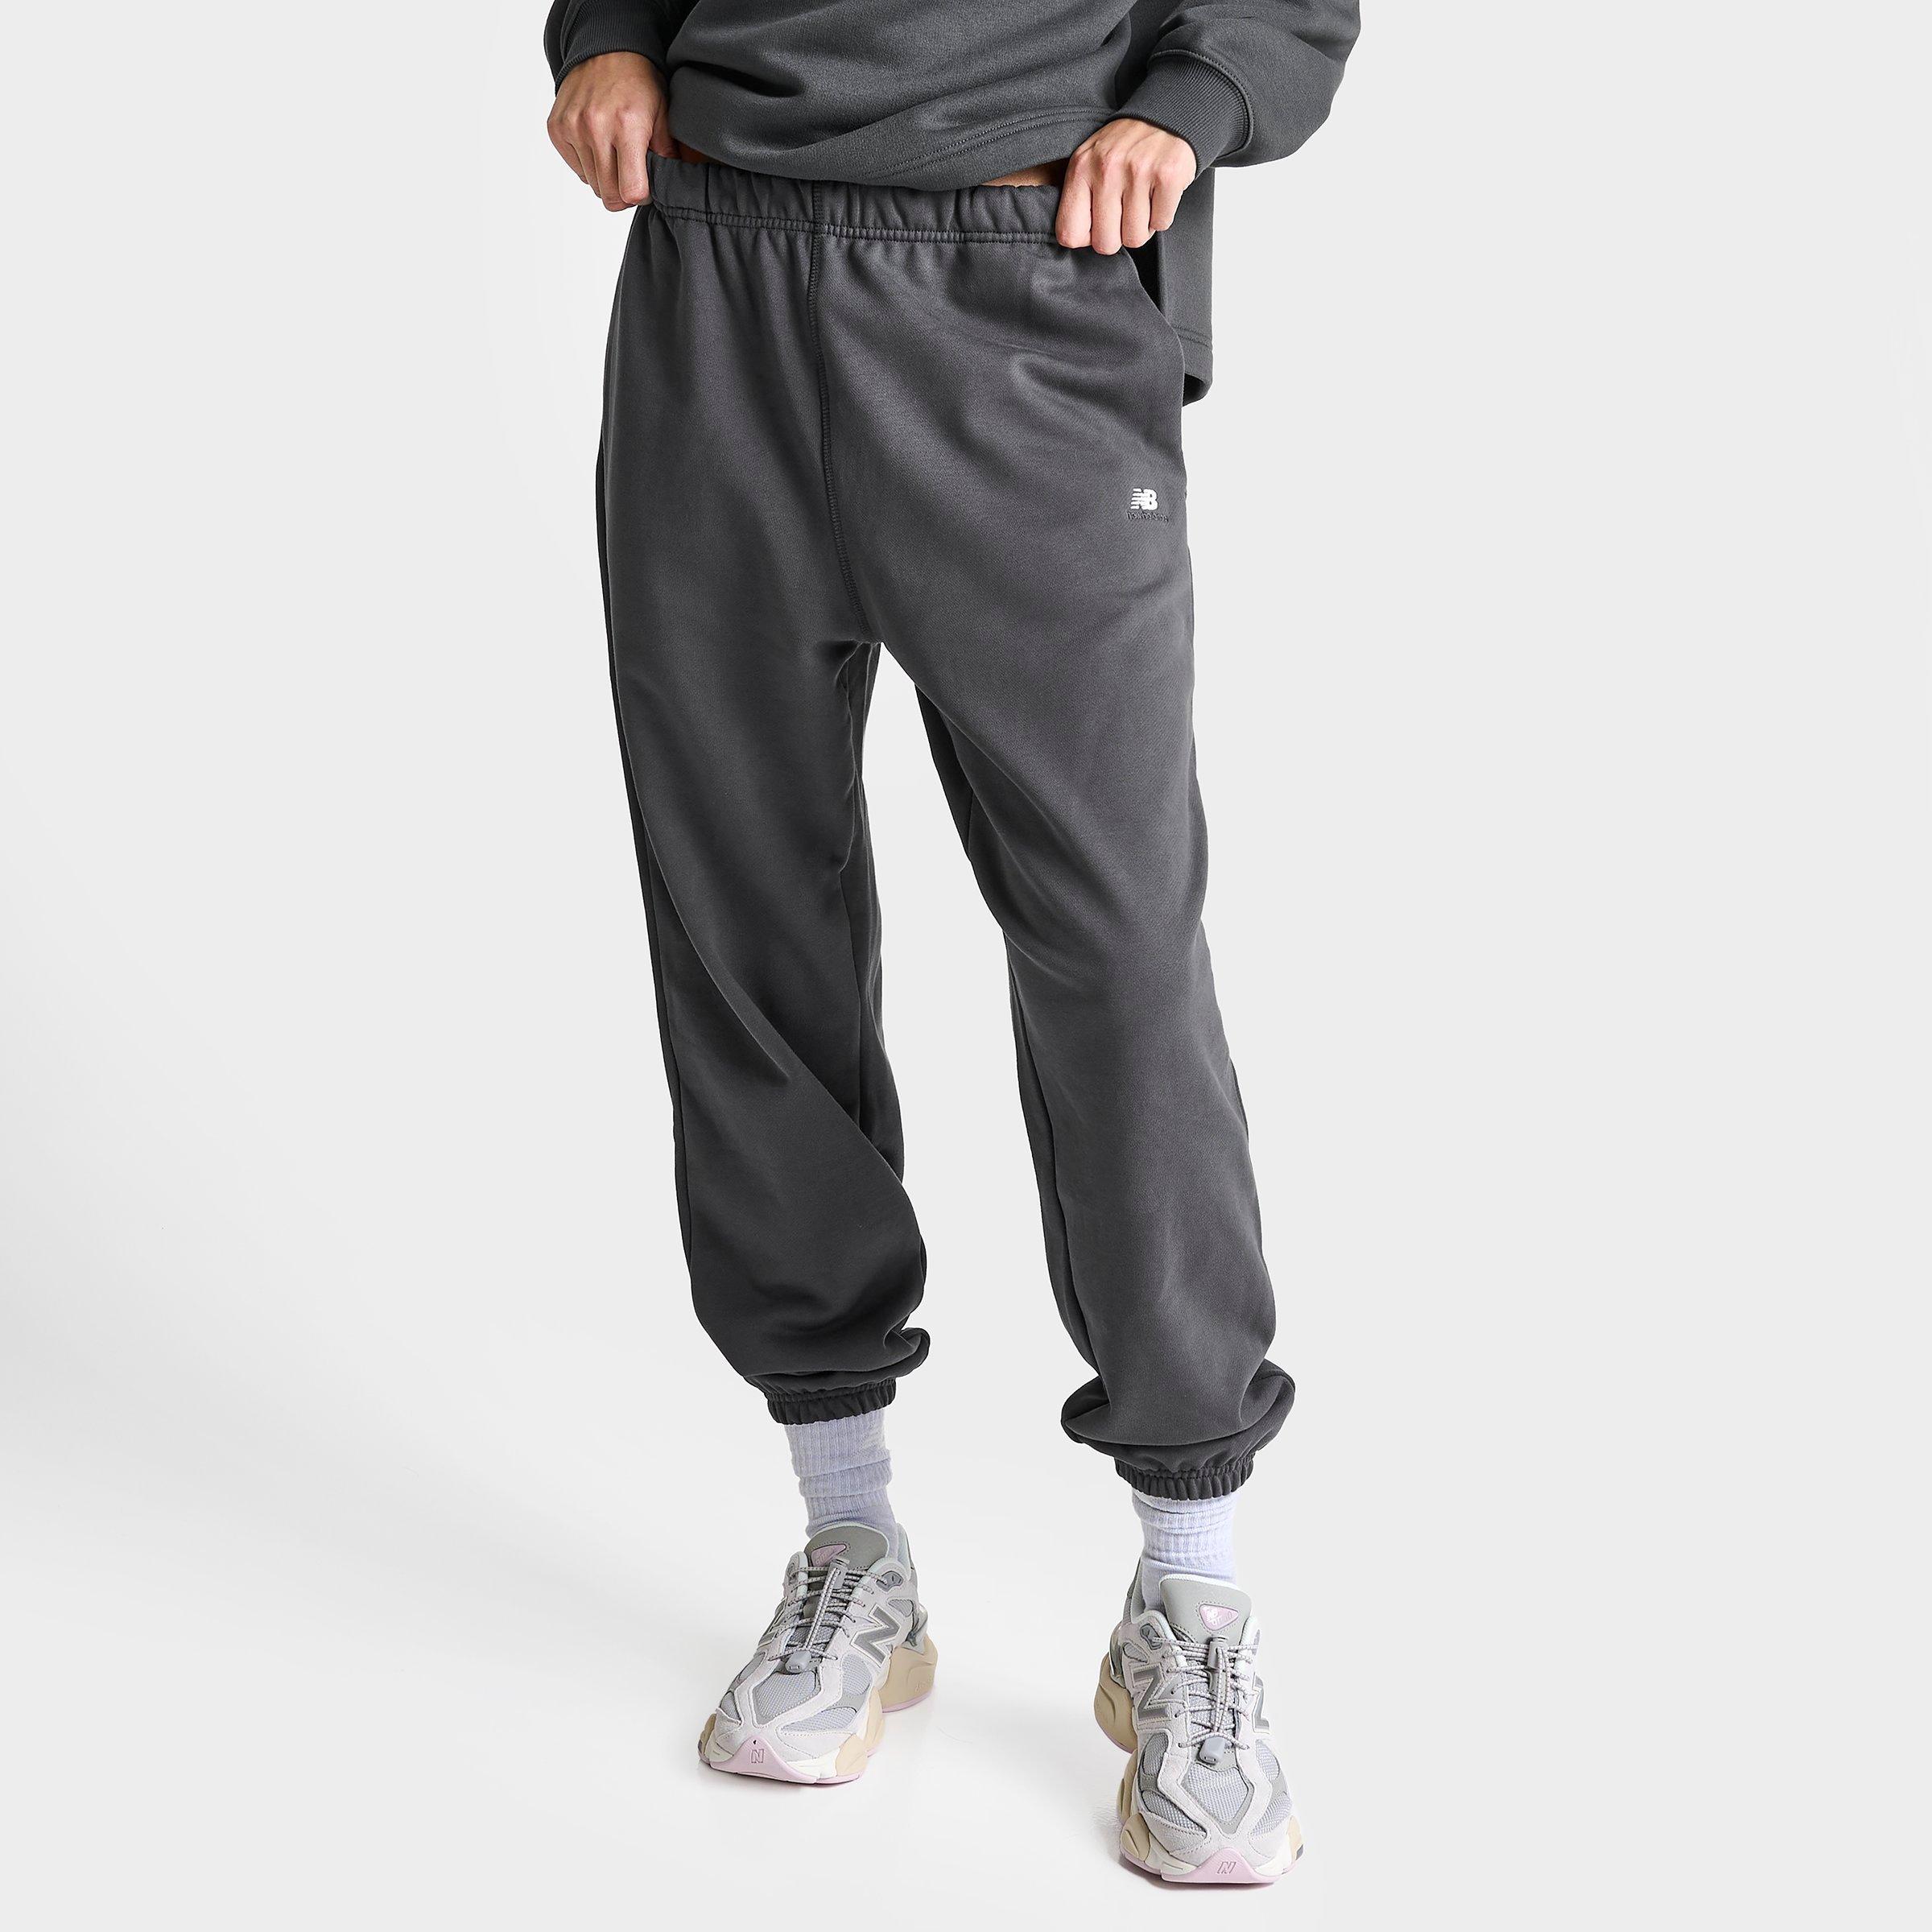 New Balance Women's Athletics Remastered French Terry Sweatpants In Multi